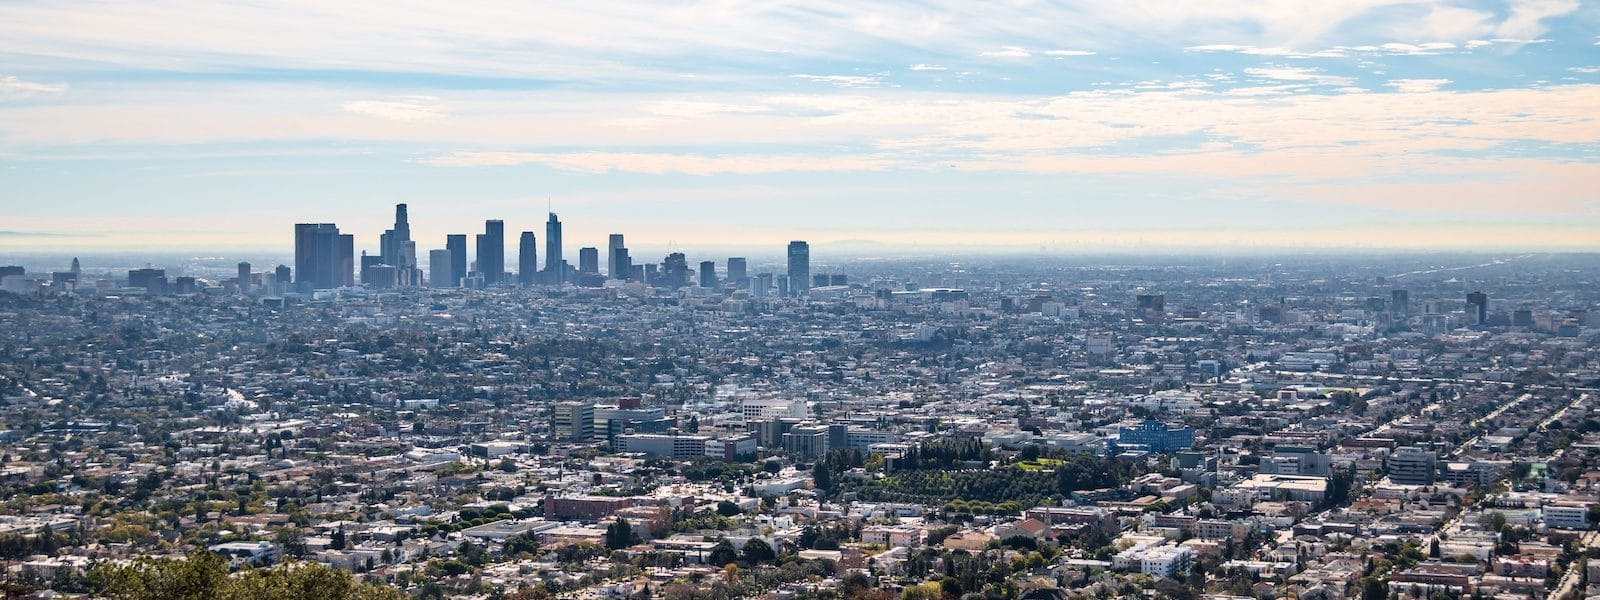 Cityscape of Greater Los Angeles